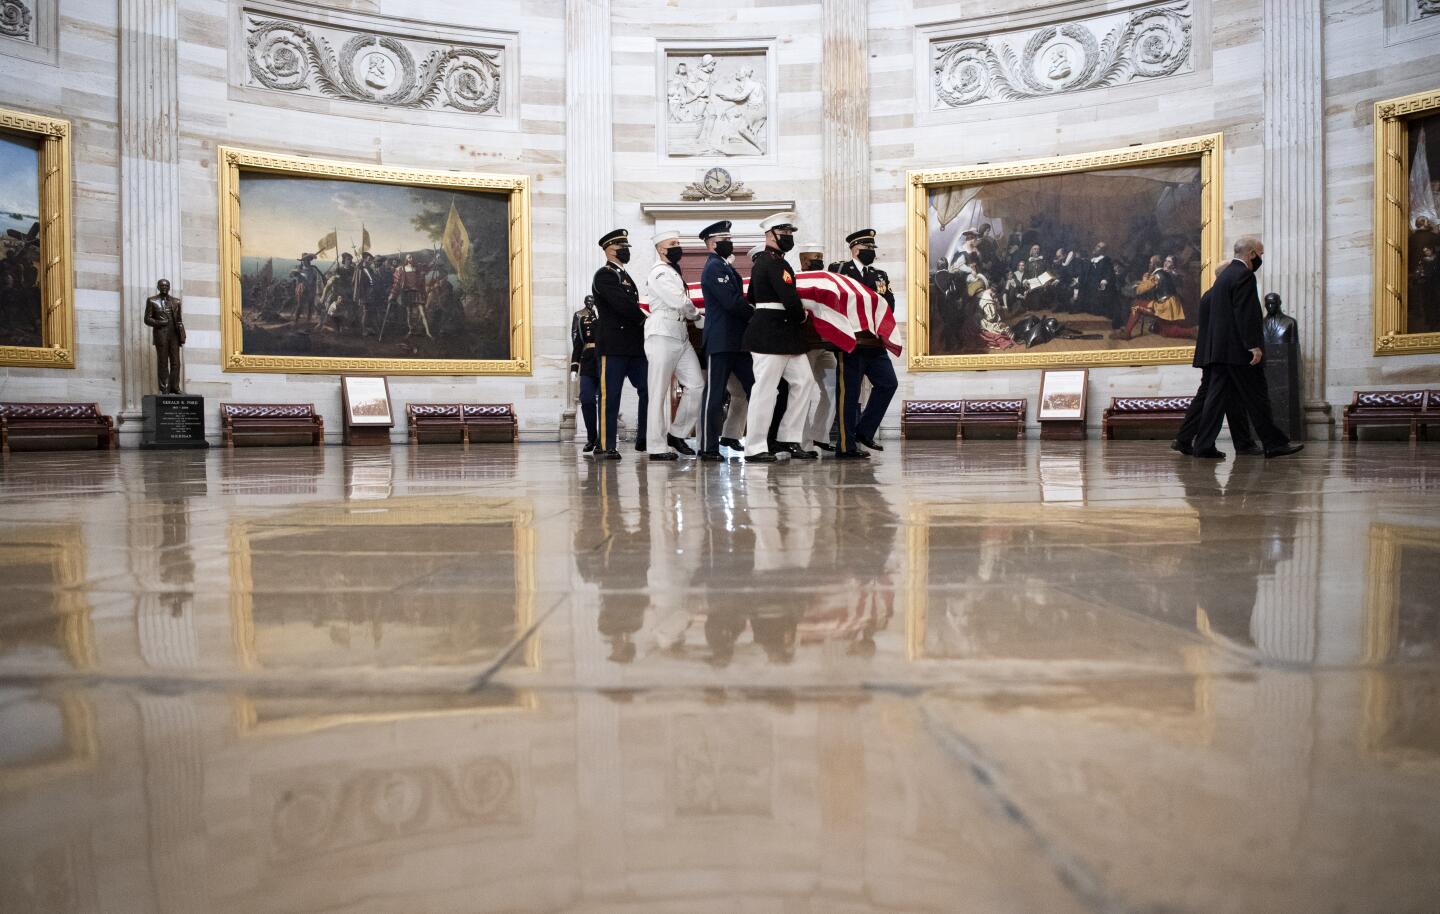 The casket of Justice Ruth Bader Ginsburg is carried by a military honor guard to lie in state at the U.S. Capitol